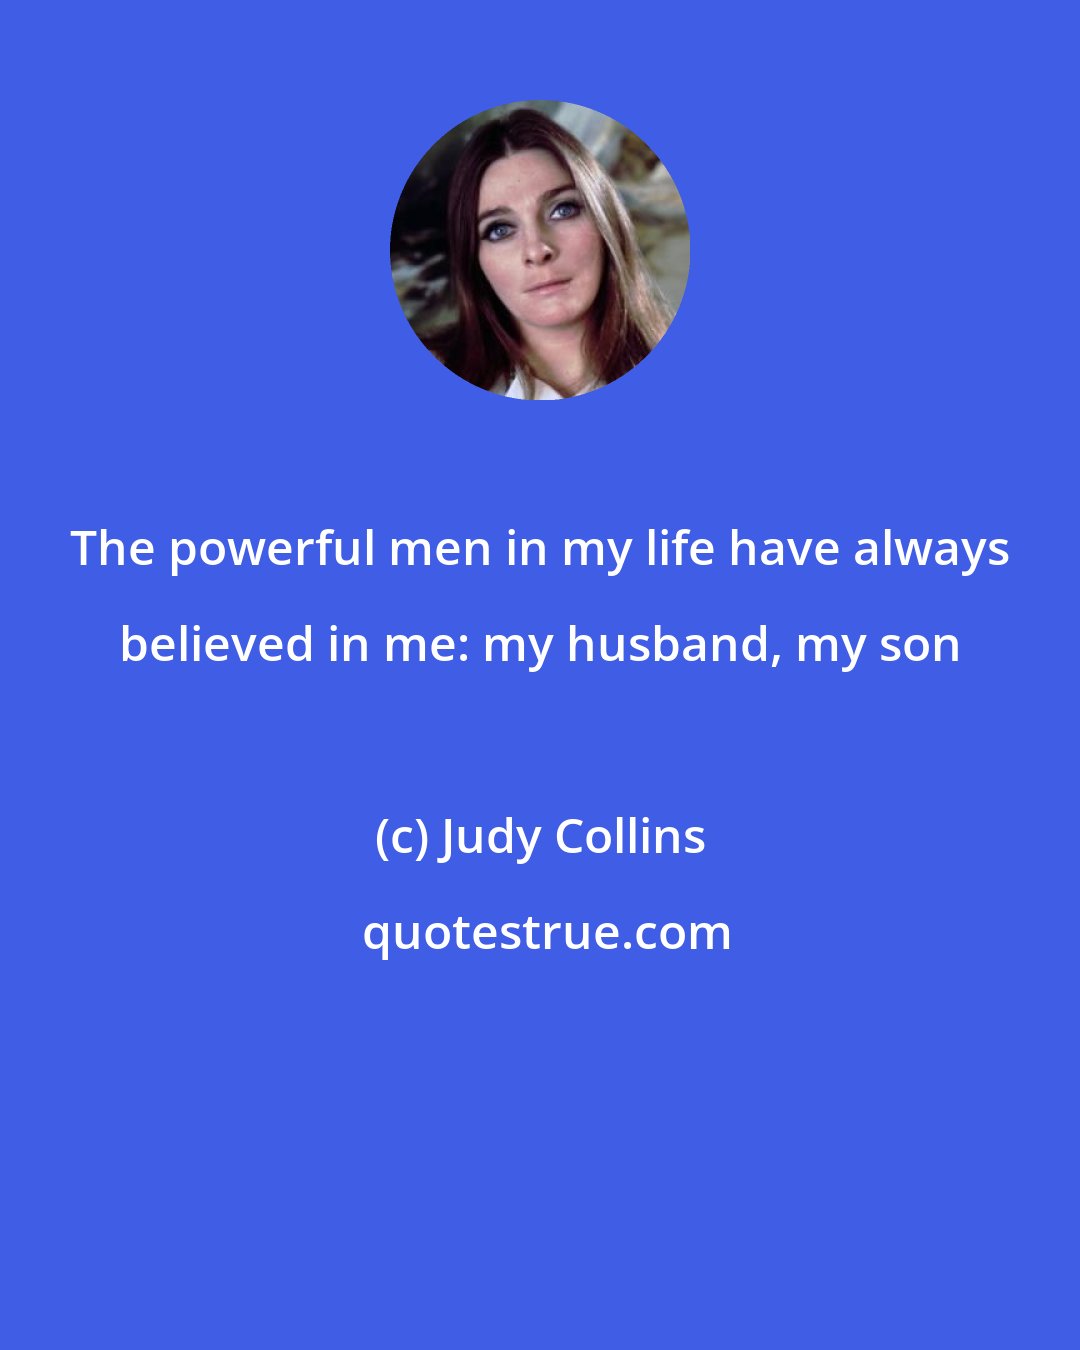 Judy Collins: The powerful men in my life have always believed in me: my husband, my son